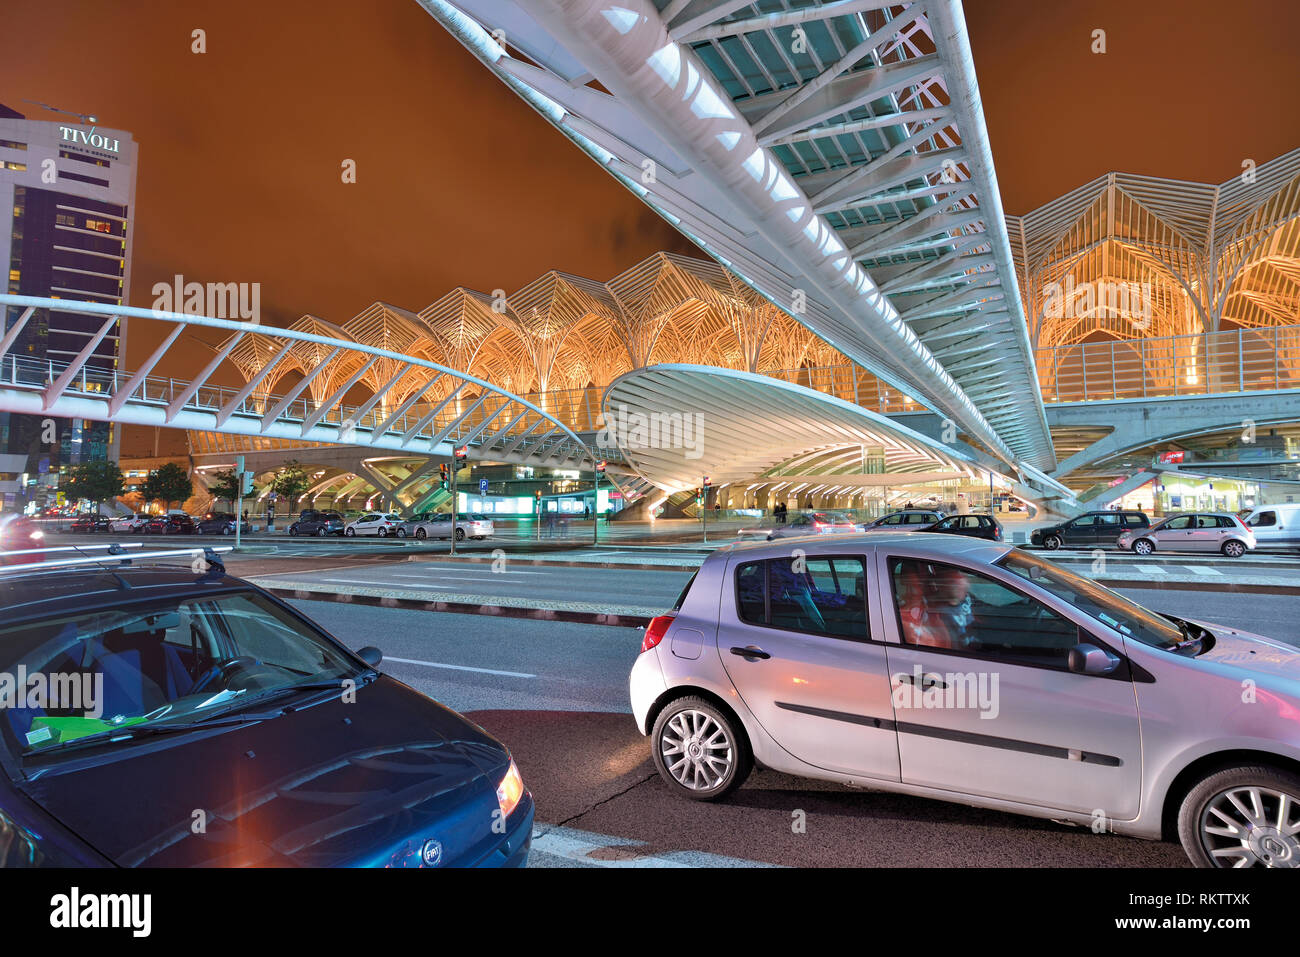 Evening traffic in large road with futuristic steel roof and bridge Stock Photo